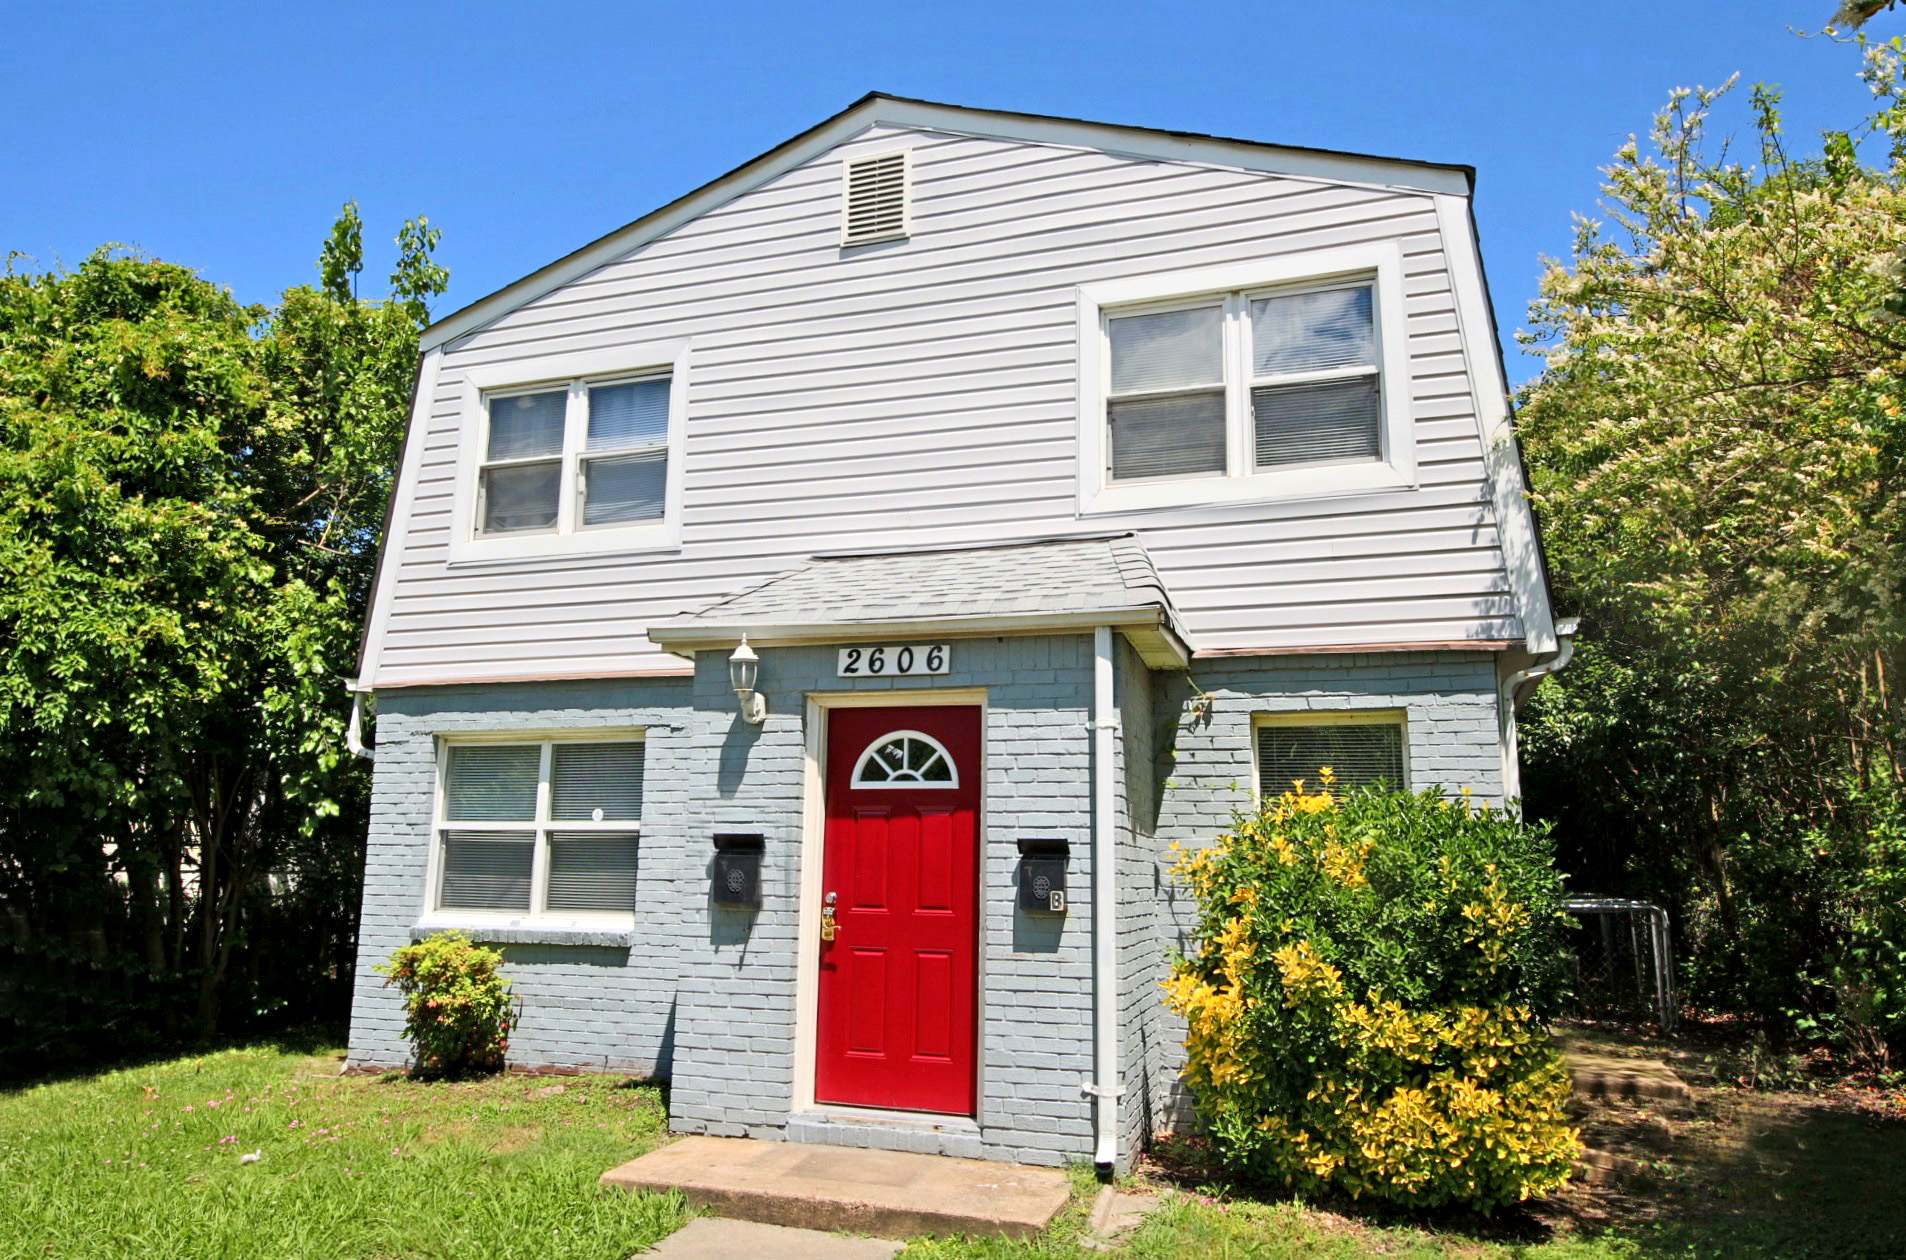 2606 Westminster Ave: Sold!